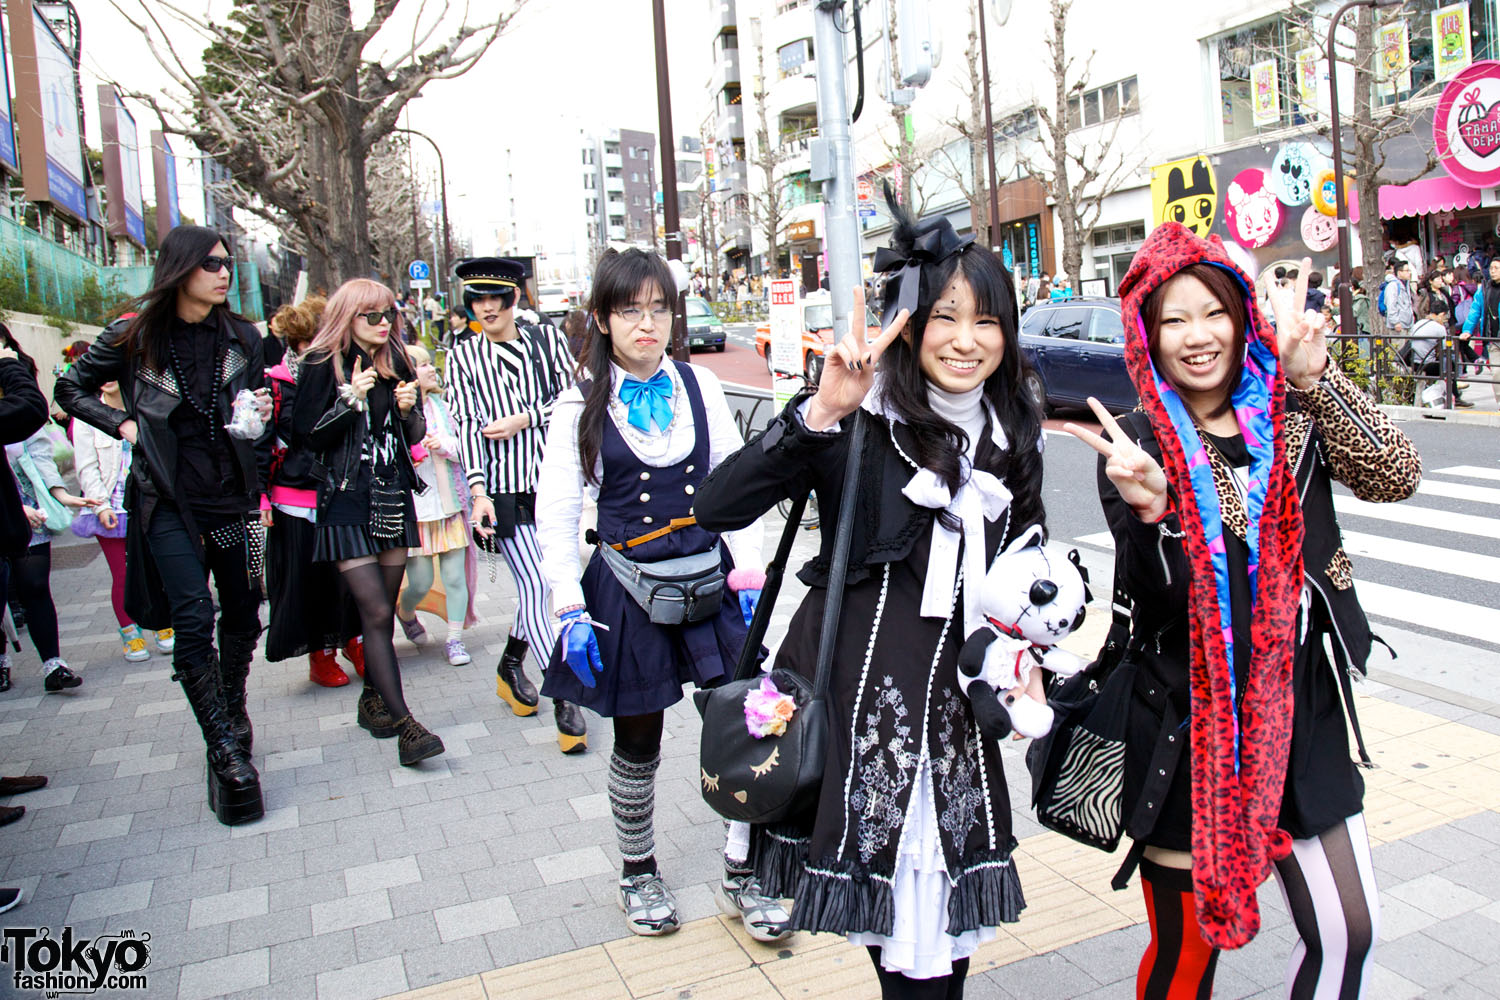 Download this Harajuku Fashion Walk Pictures picture